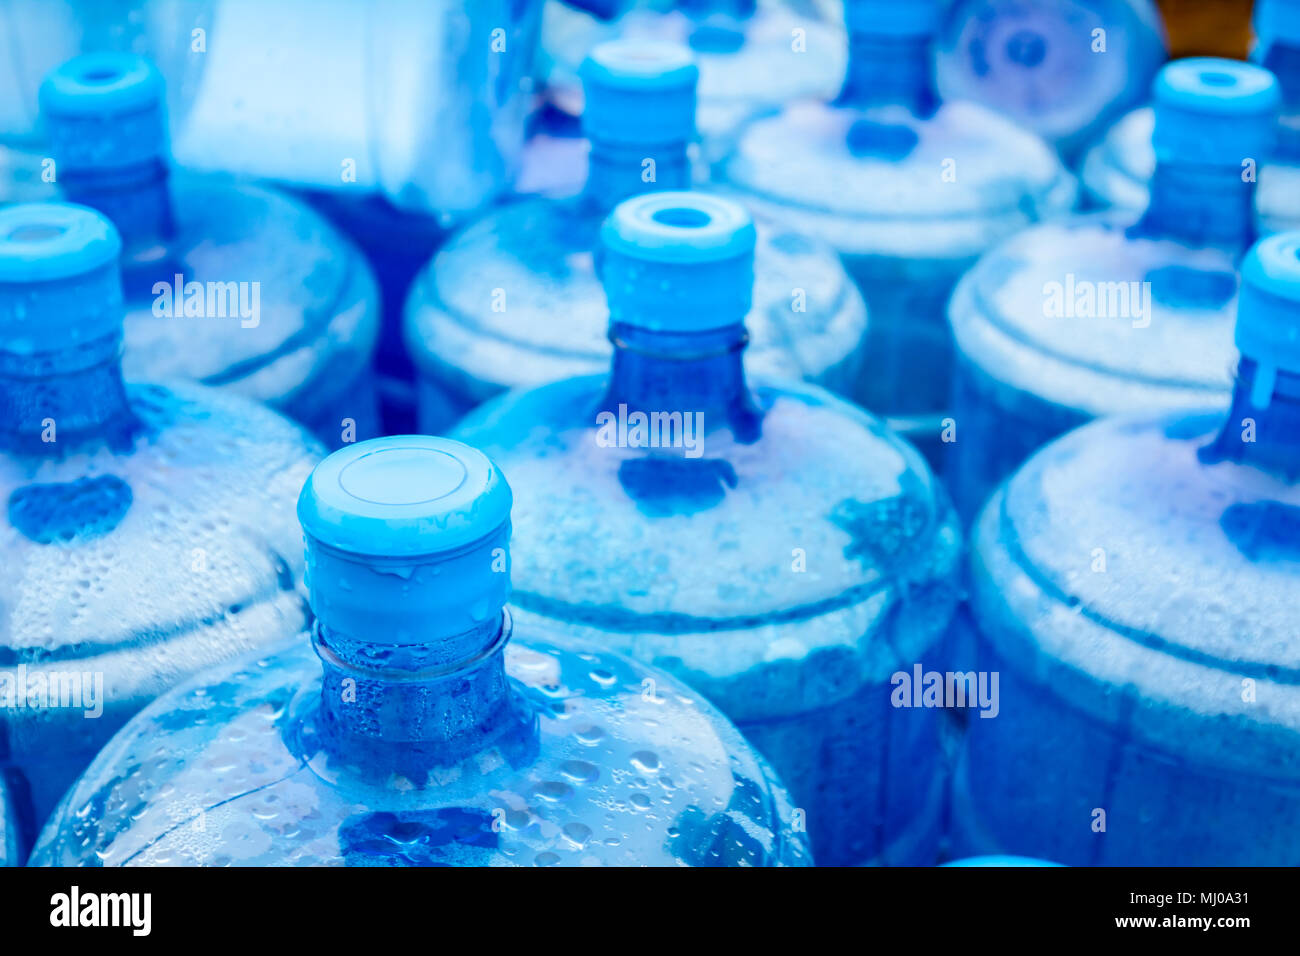 Big empty plastic water bottles for the cooler are stacked at outdoor warehouse. Stock Photo